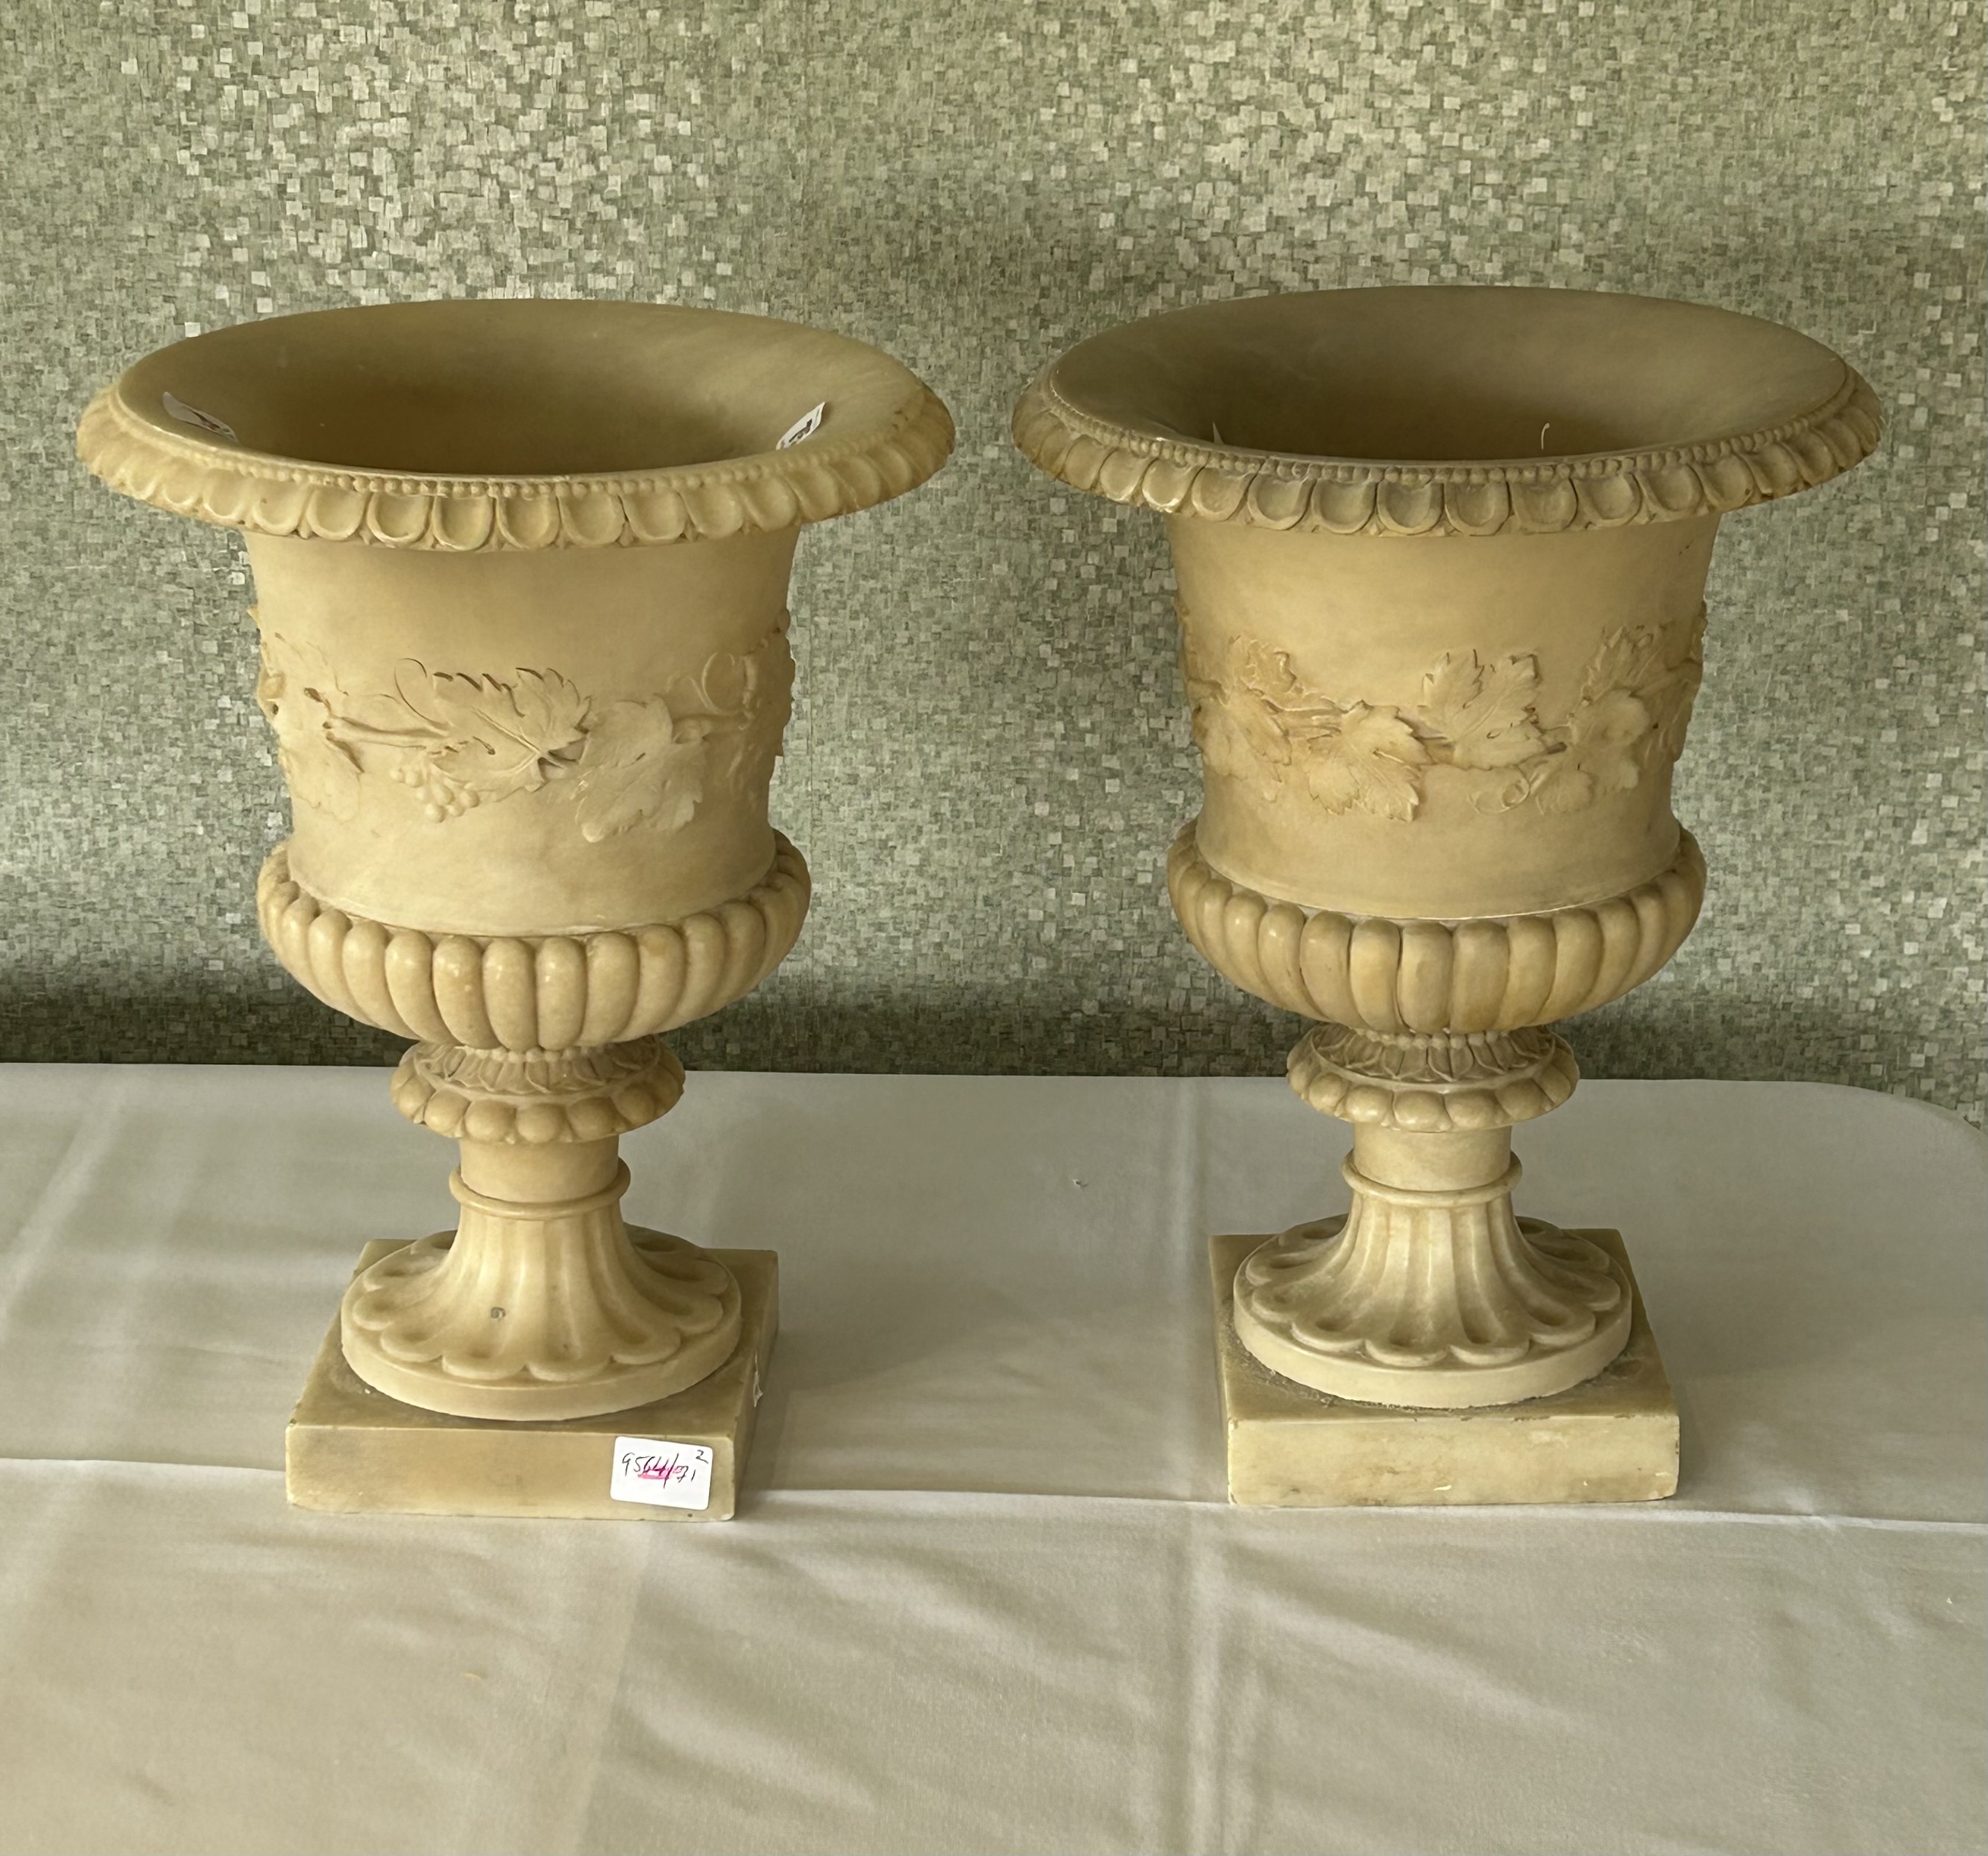 A pair of large 19th century Italian Grand Tour alabaster urns - Image 5 of 5